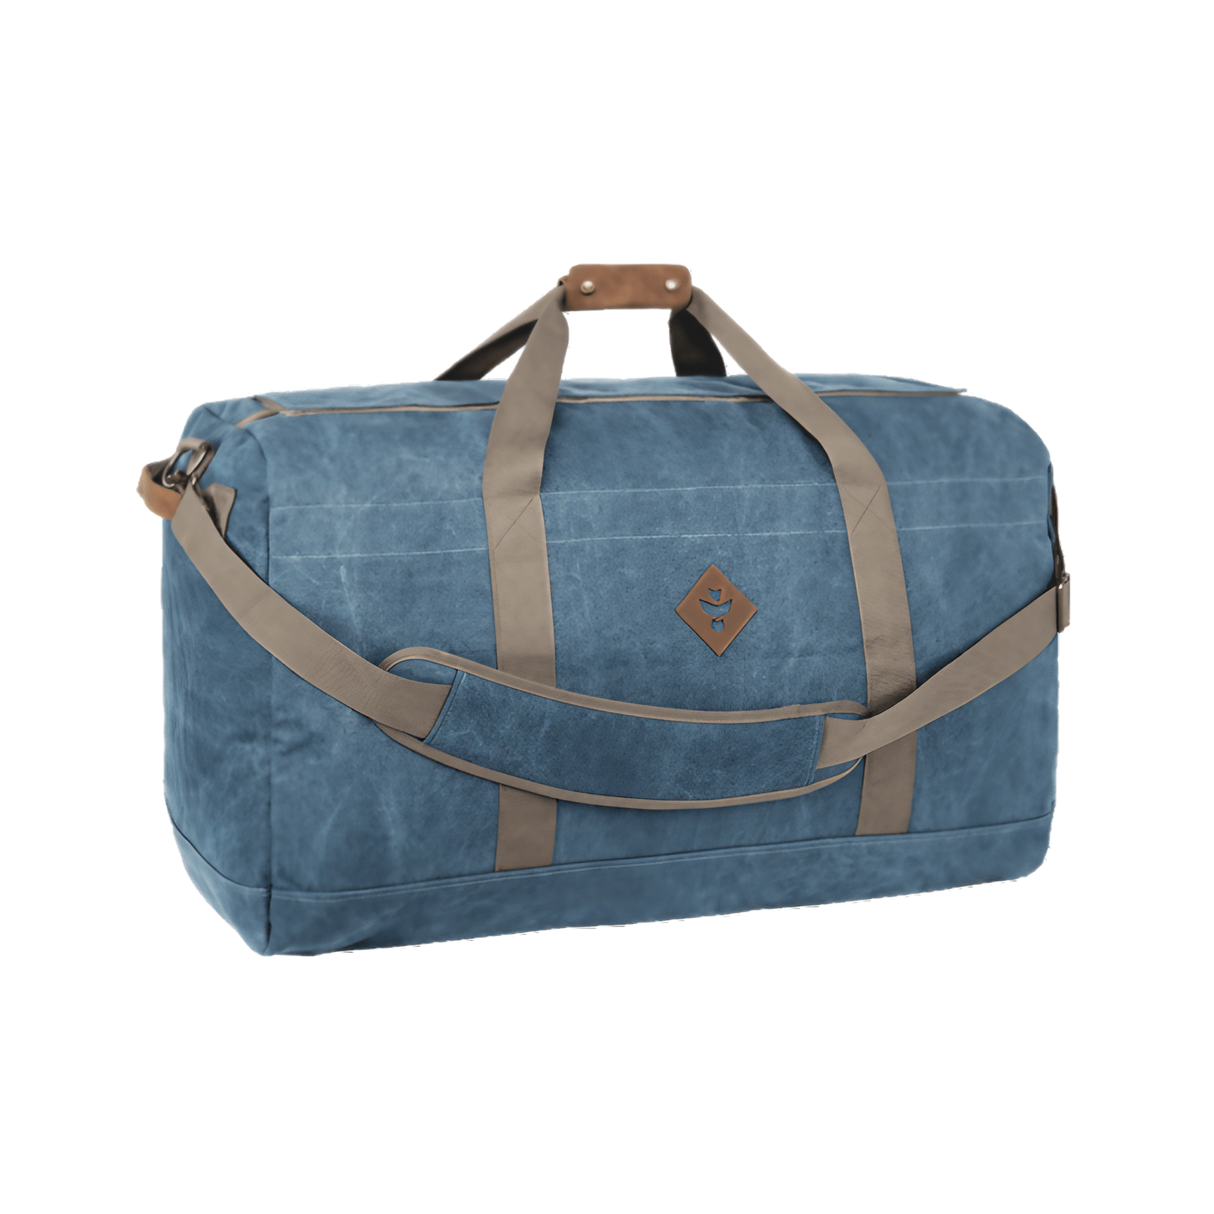 Revelry Supply Continental medium-sized rubber duffel bag in Marine, front view on a white background